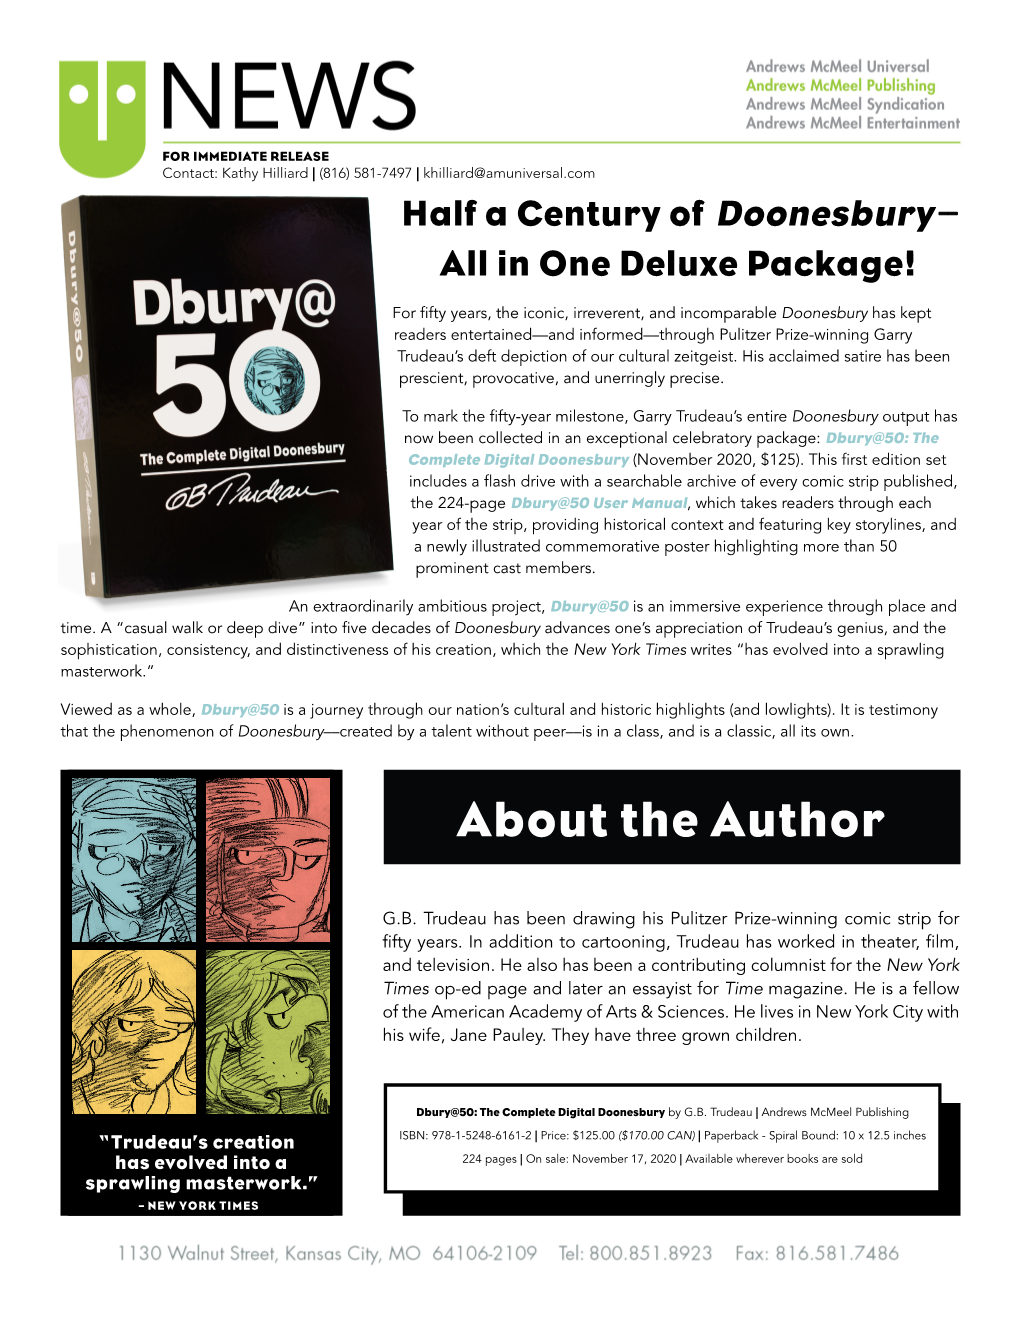 Additional Information About Dbury@50